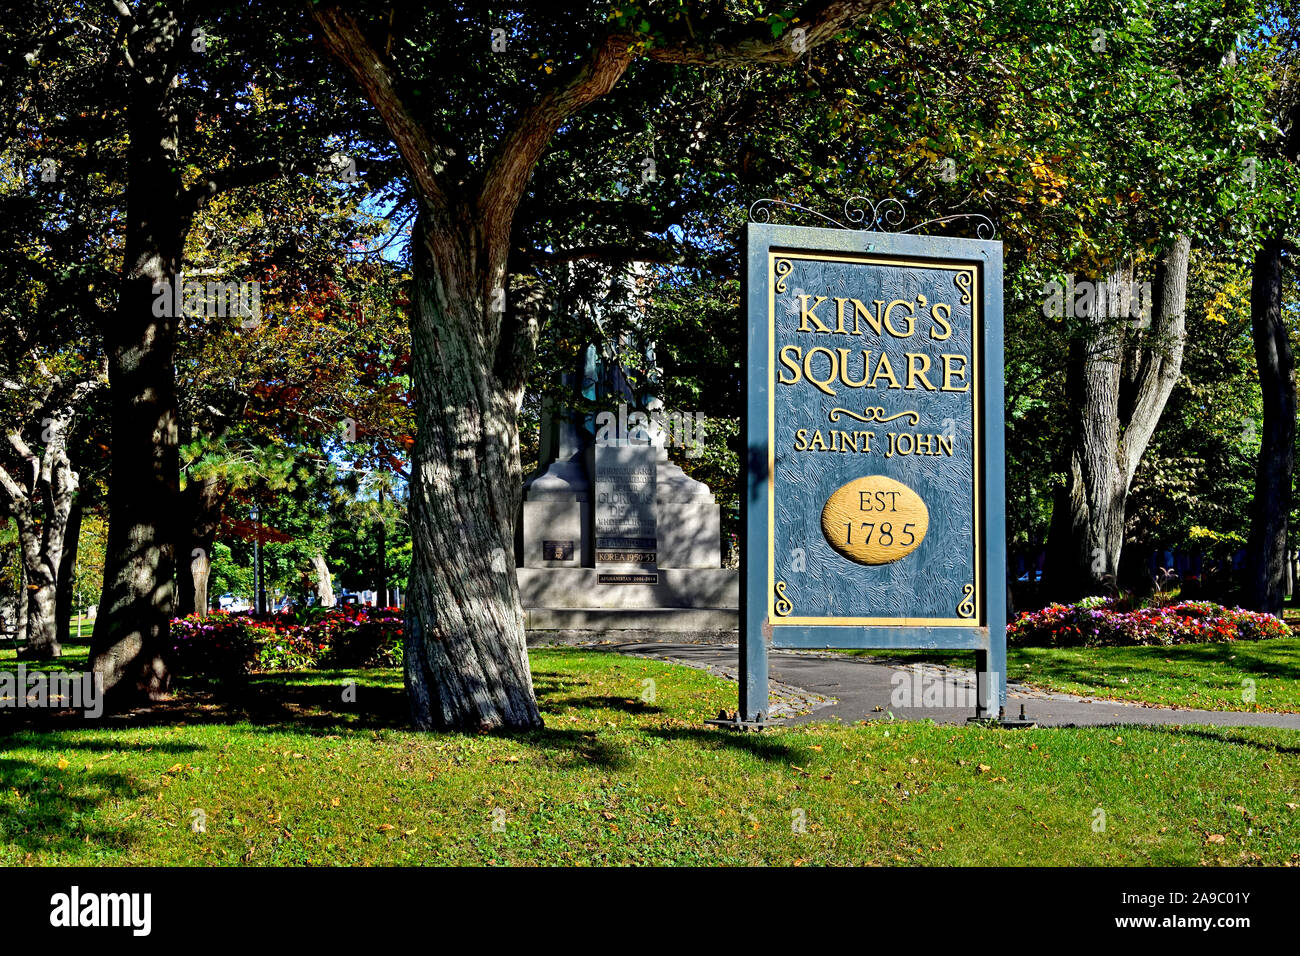 A landscape of the sign telling tourist that they are entering a green space known as King's Square in the city of Saint John New Brunswick. Stock Photo